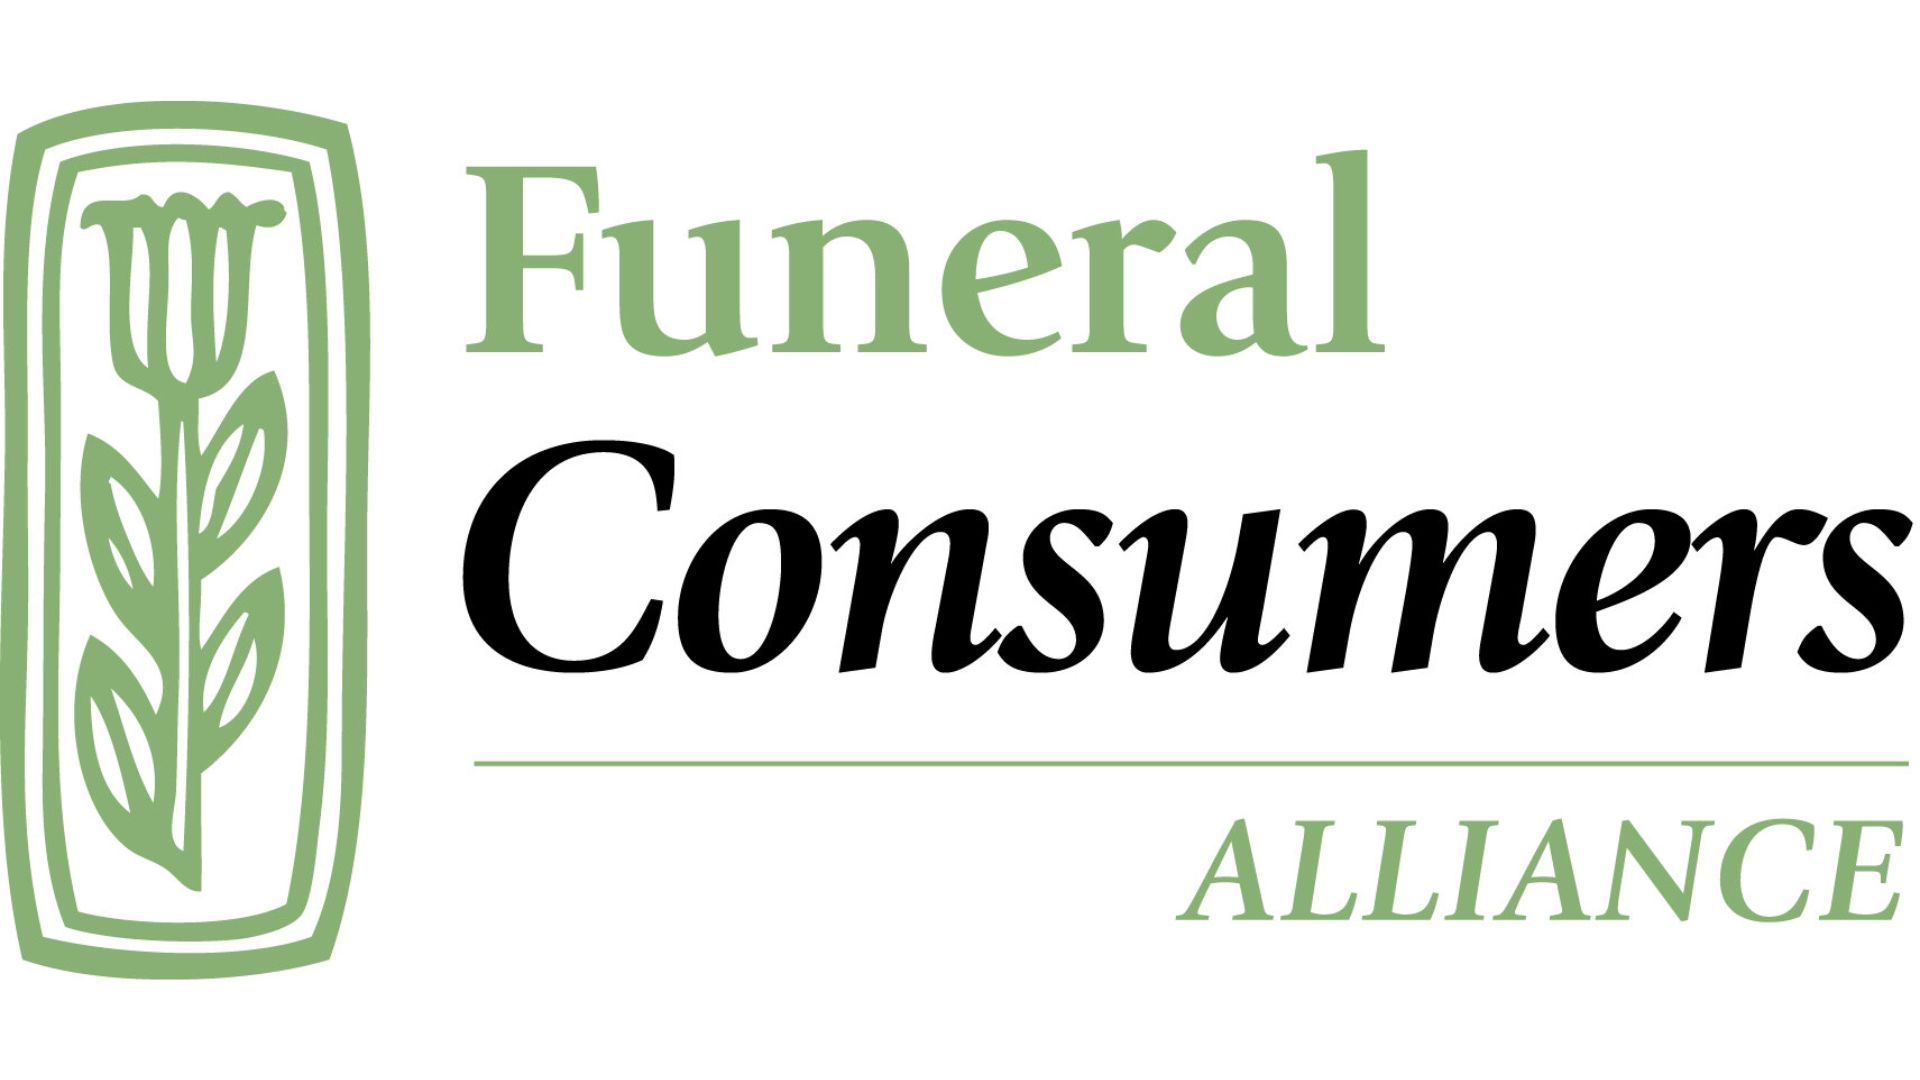 Funeral Consumers Alliance.